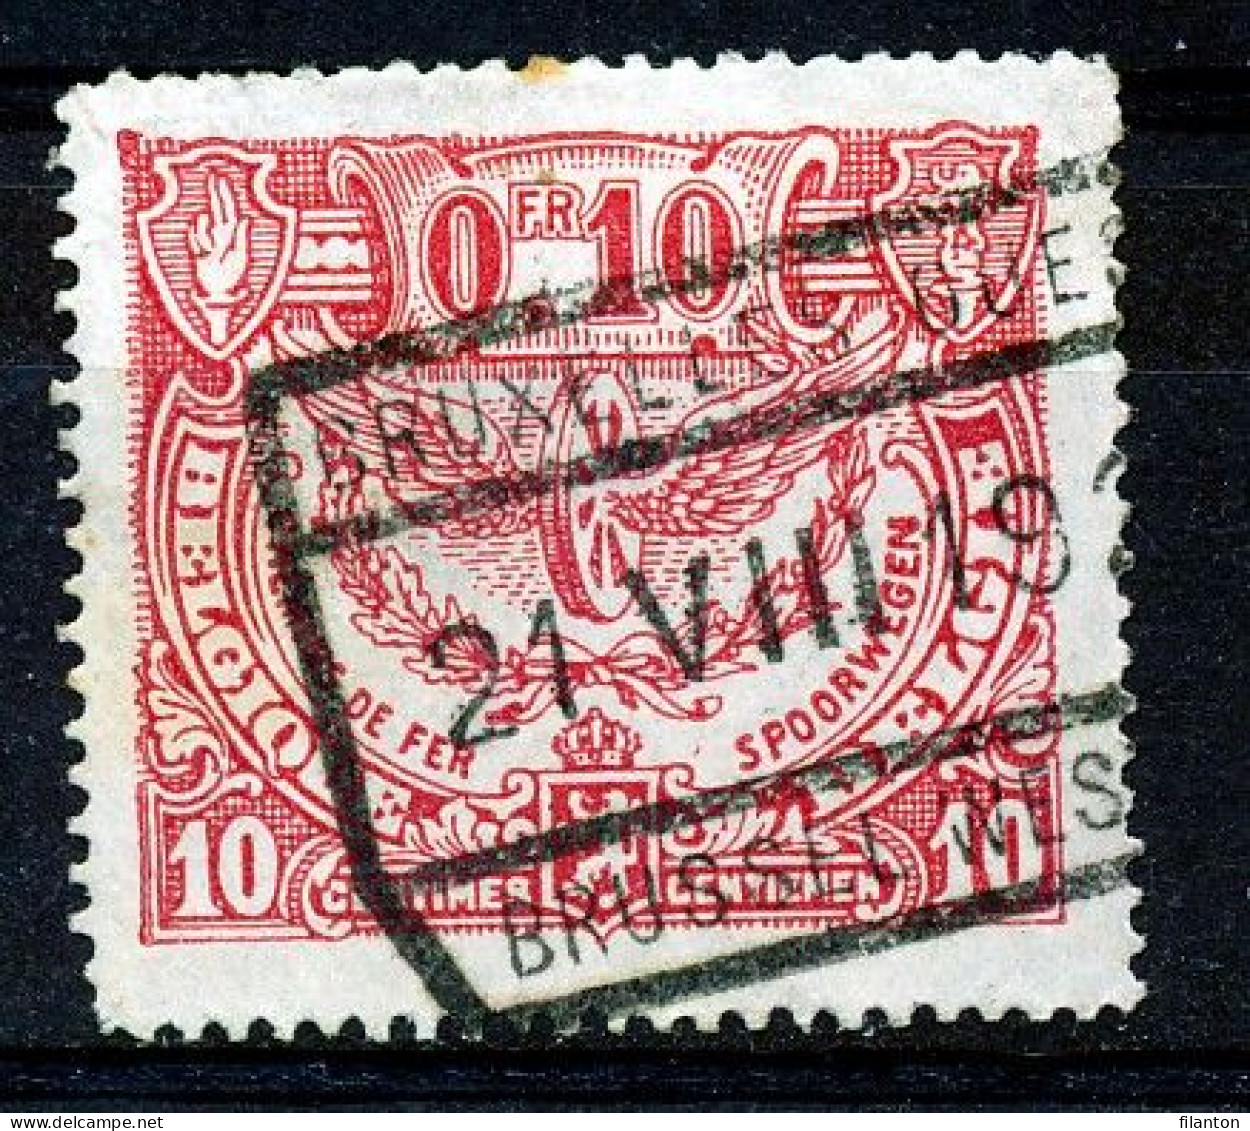 TR  100 -  "BRUXELLS-OUEST - BRUSSEL-WEST" - (ref. 37.034) - Used